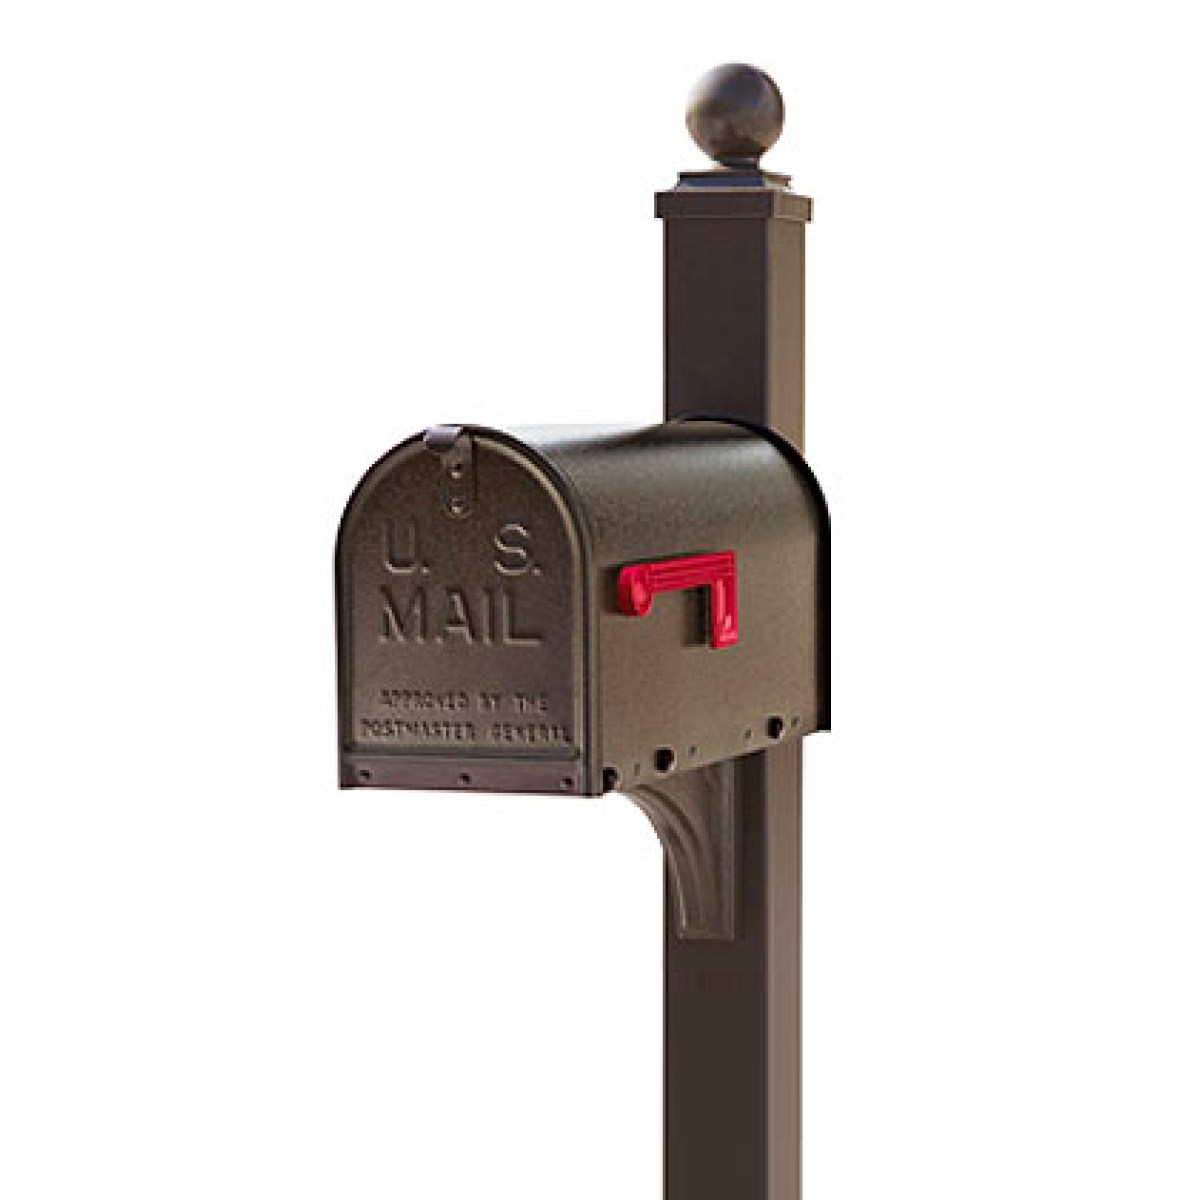 Janzer Mailbox with Post for Sale Product Image